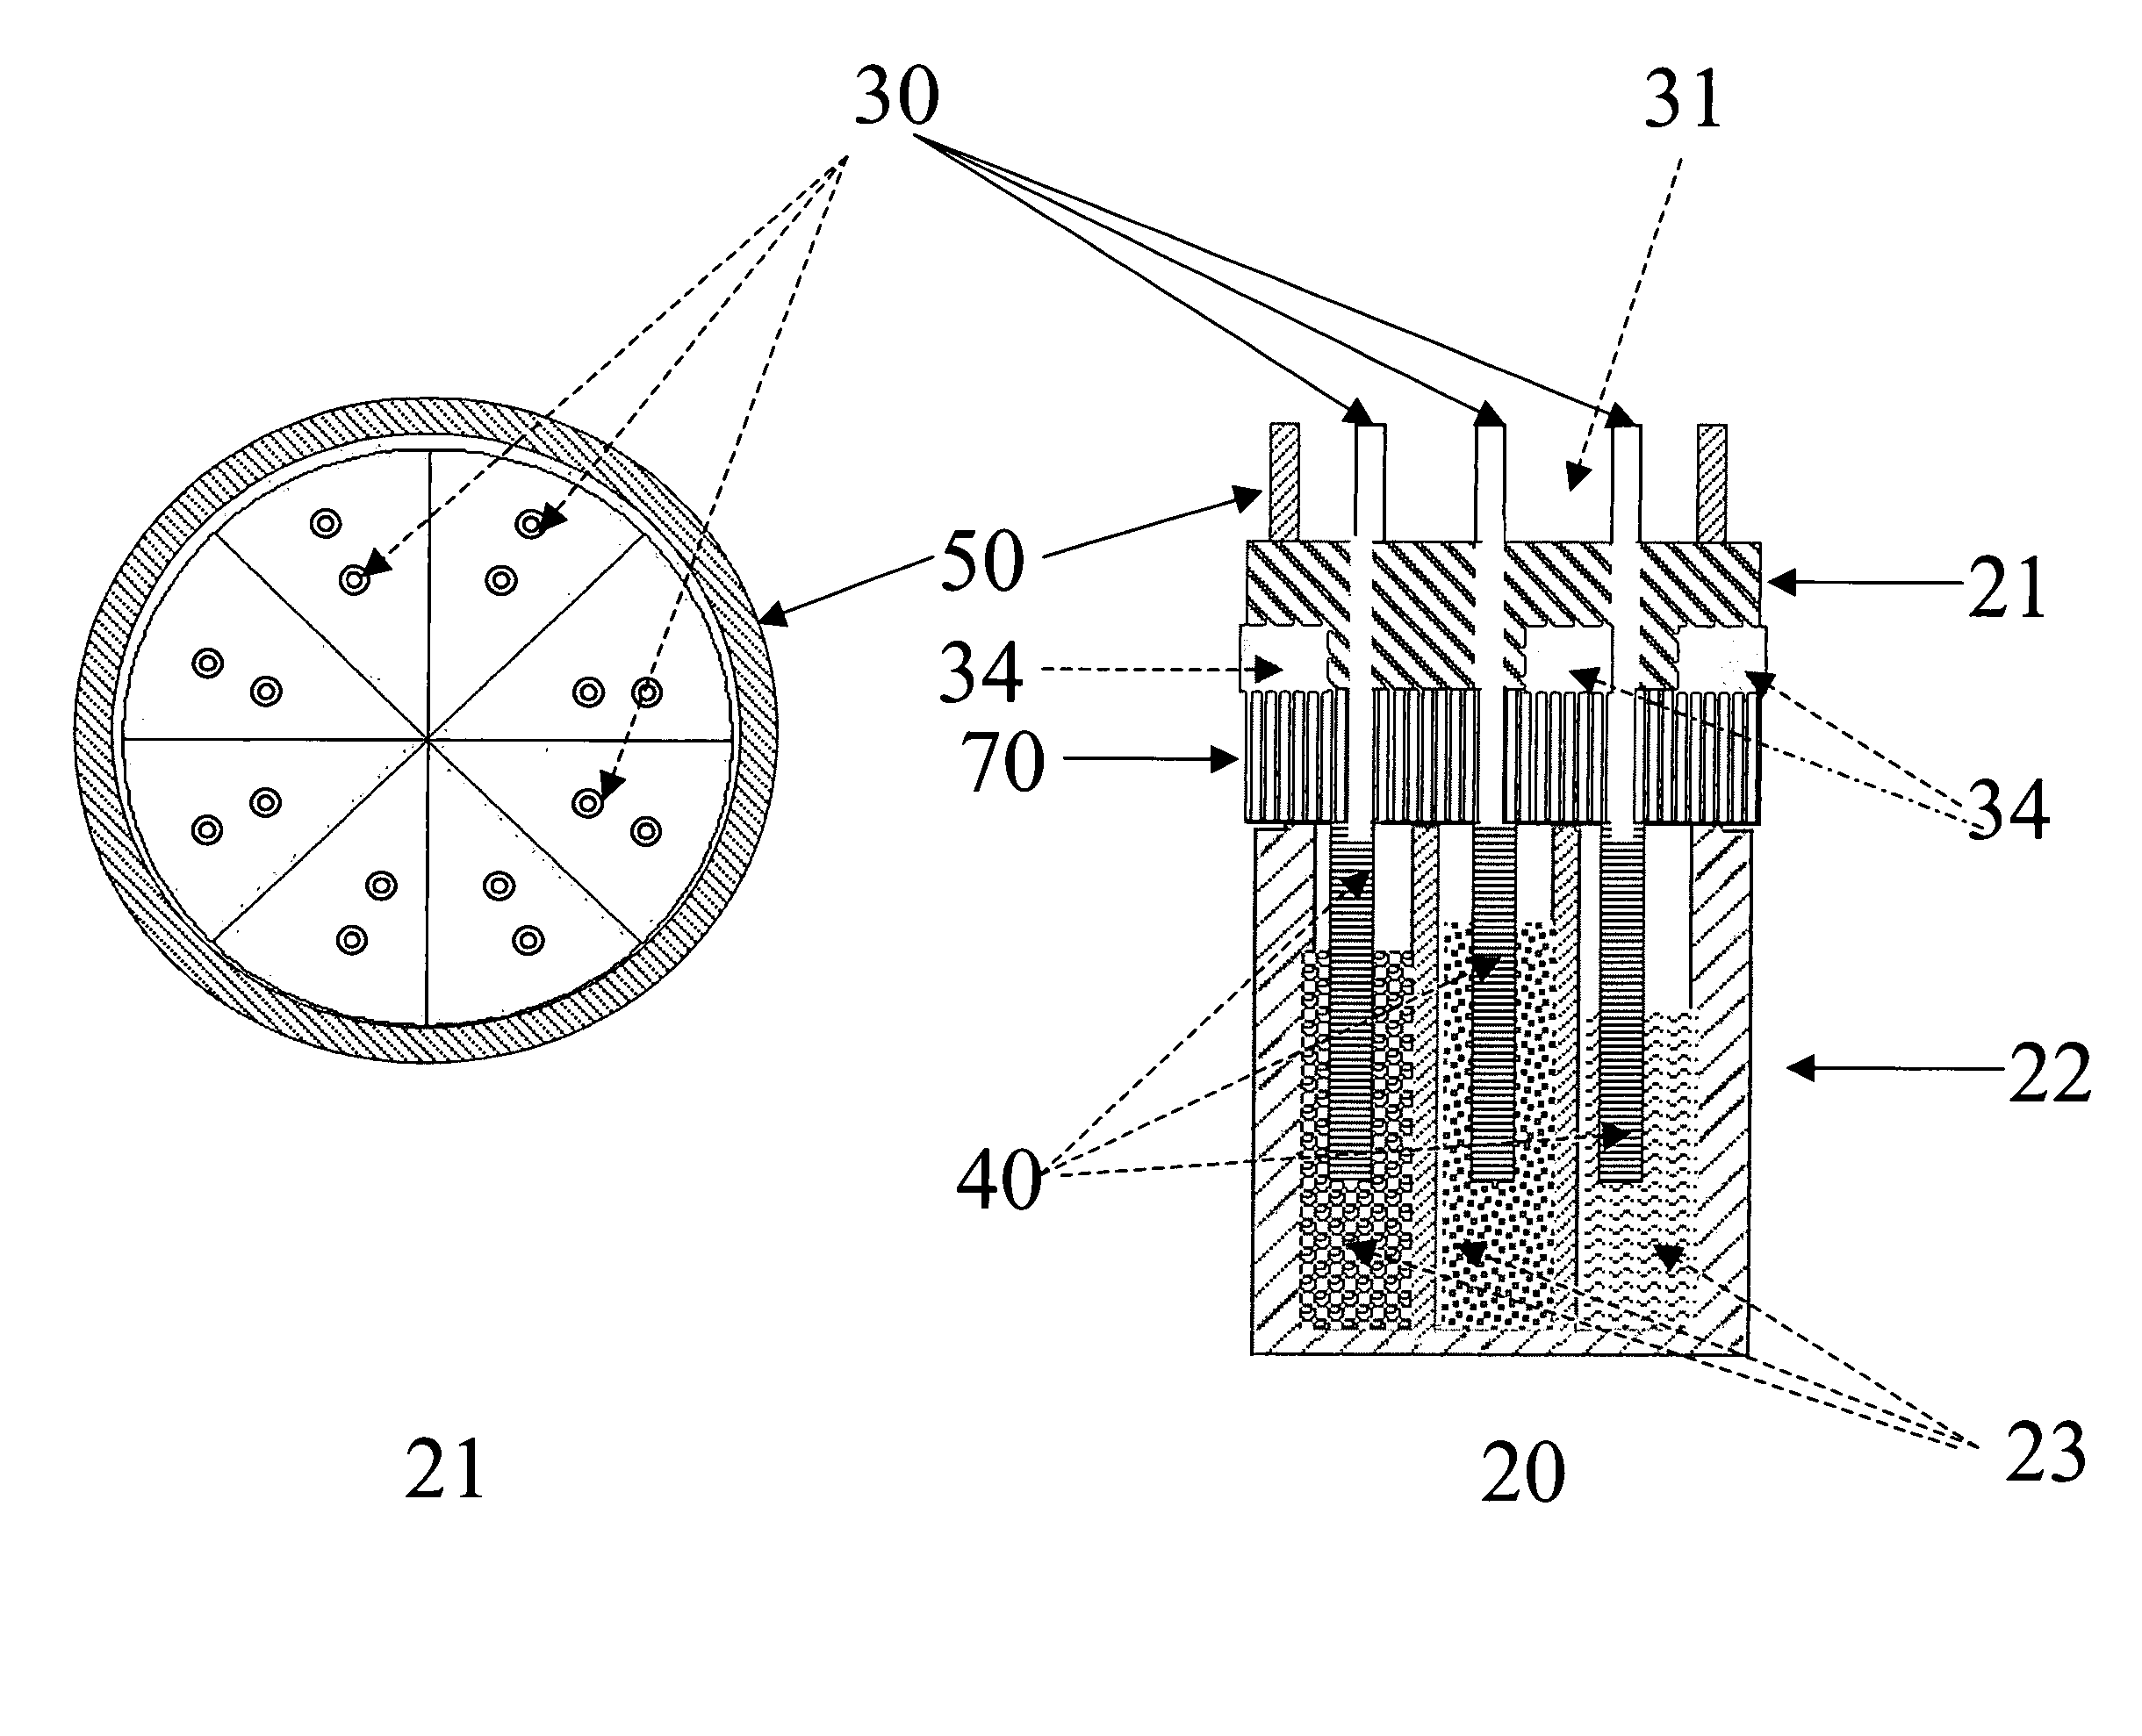 Replaceable electrostatically sprayable material reservoir for use with a electrostatic spraying device